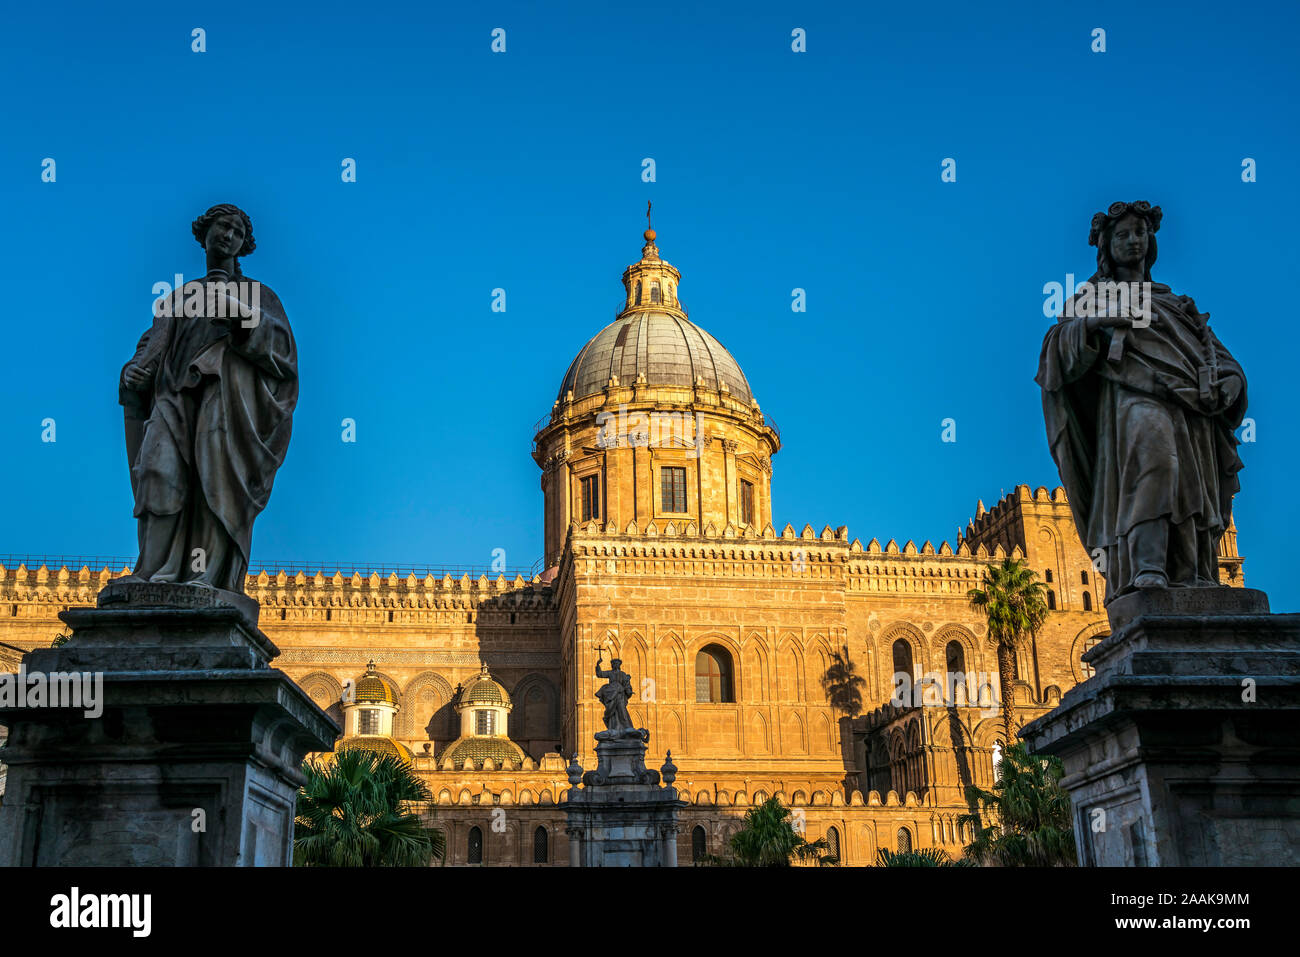 Statuen vor der Kathedrale Maria Santissima Assunta,  Palermo, Sizilien, Italien, Europa  |  statues  in front of  the Cathedral of the Assumption of Stock Photo